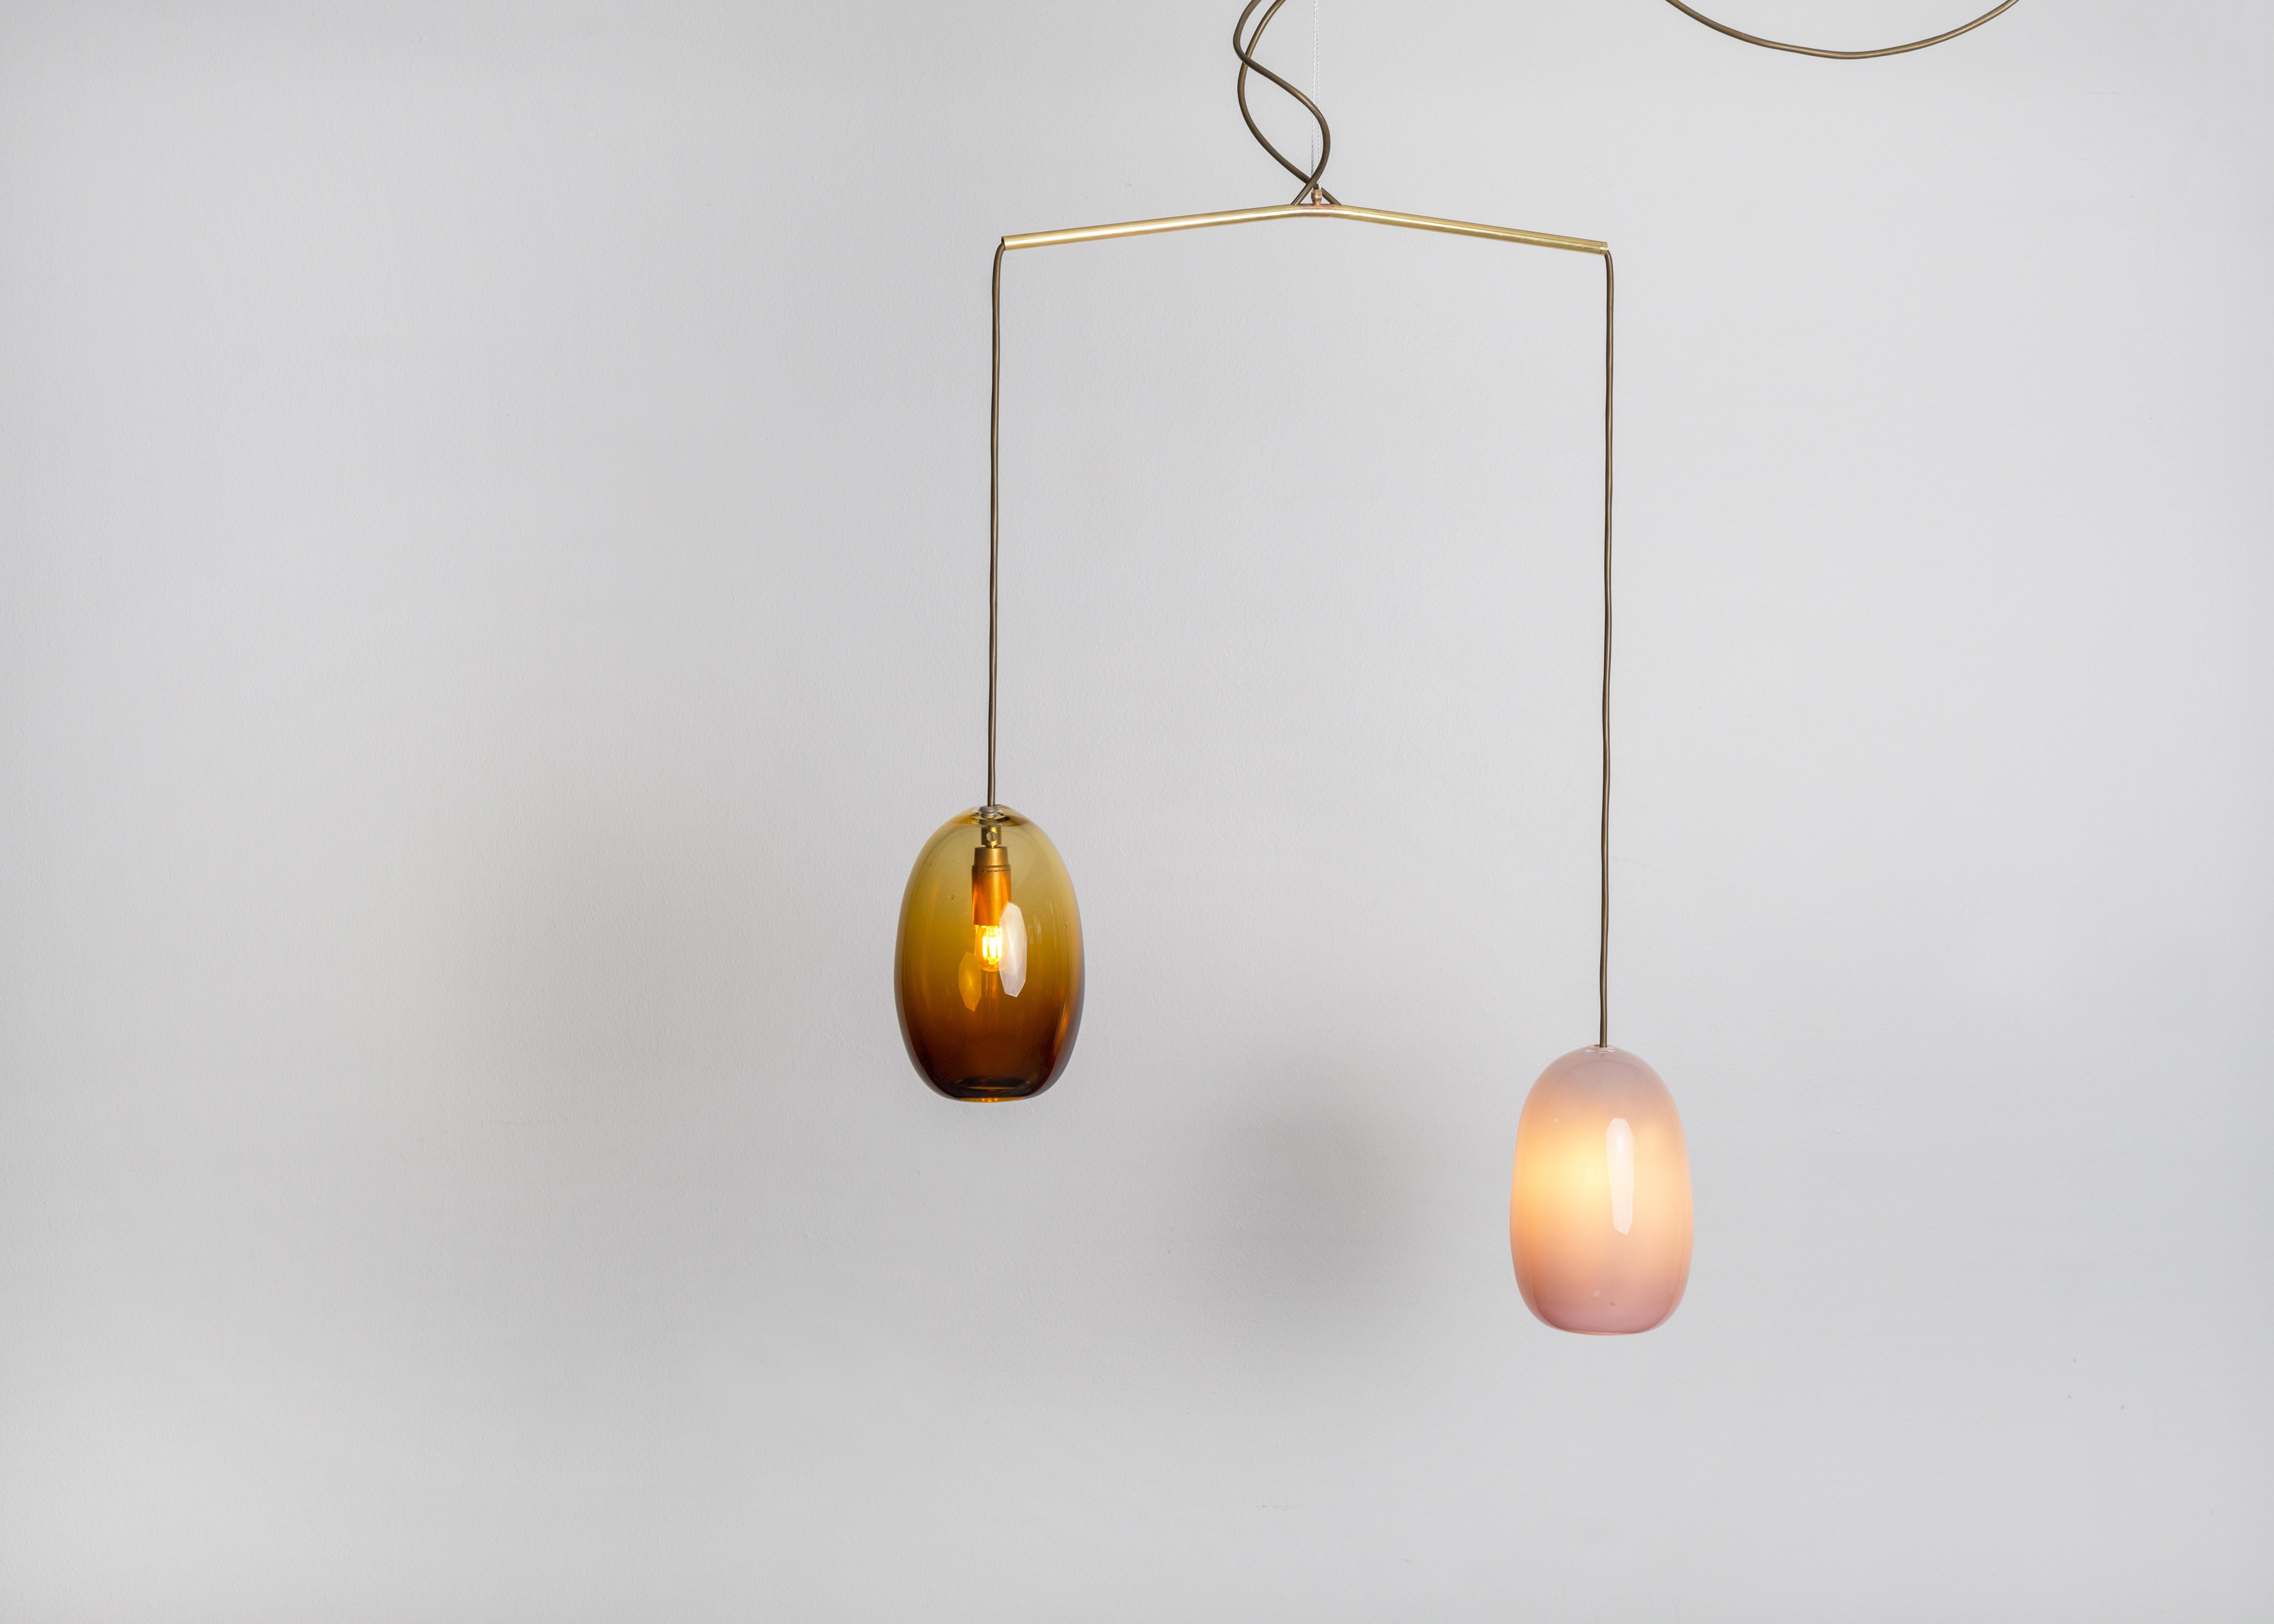 Light No. 15, by Milla Vaahtera
Dimensions: H 40 x W 60
Materials: glass and brass

Vaahtera began to work on this series in May 2017 together with glassblowers Paula Paakkonen, Sani Lappalainen, Pauli Vahasarja, Henni Eliala and Jonas Paajanen